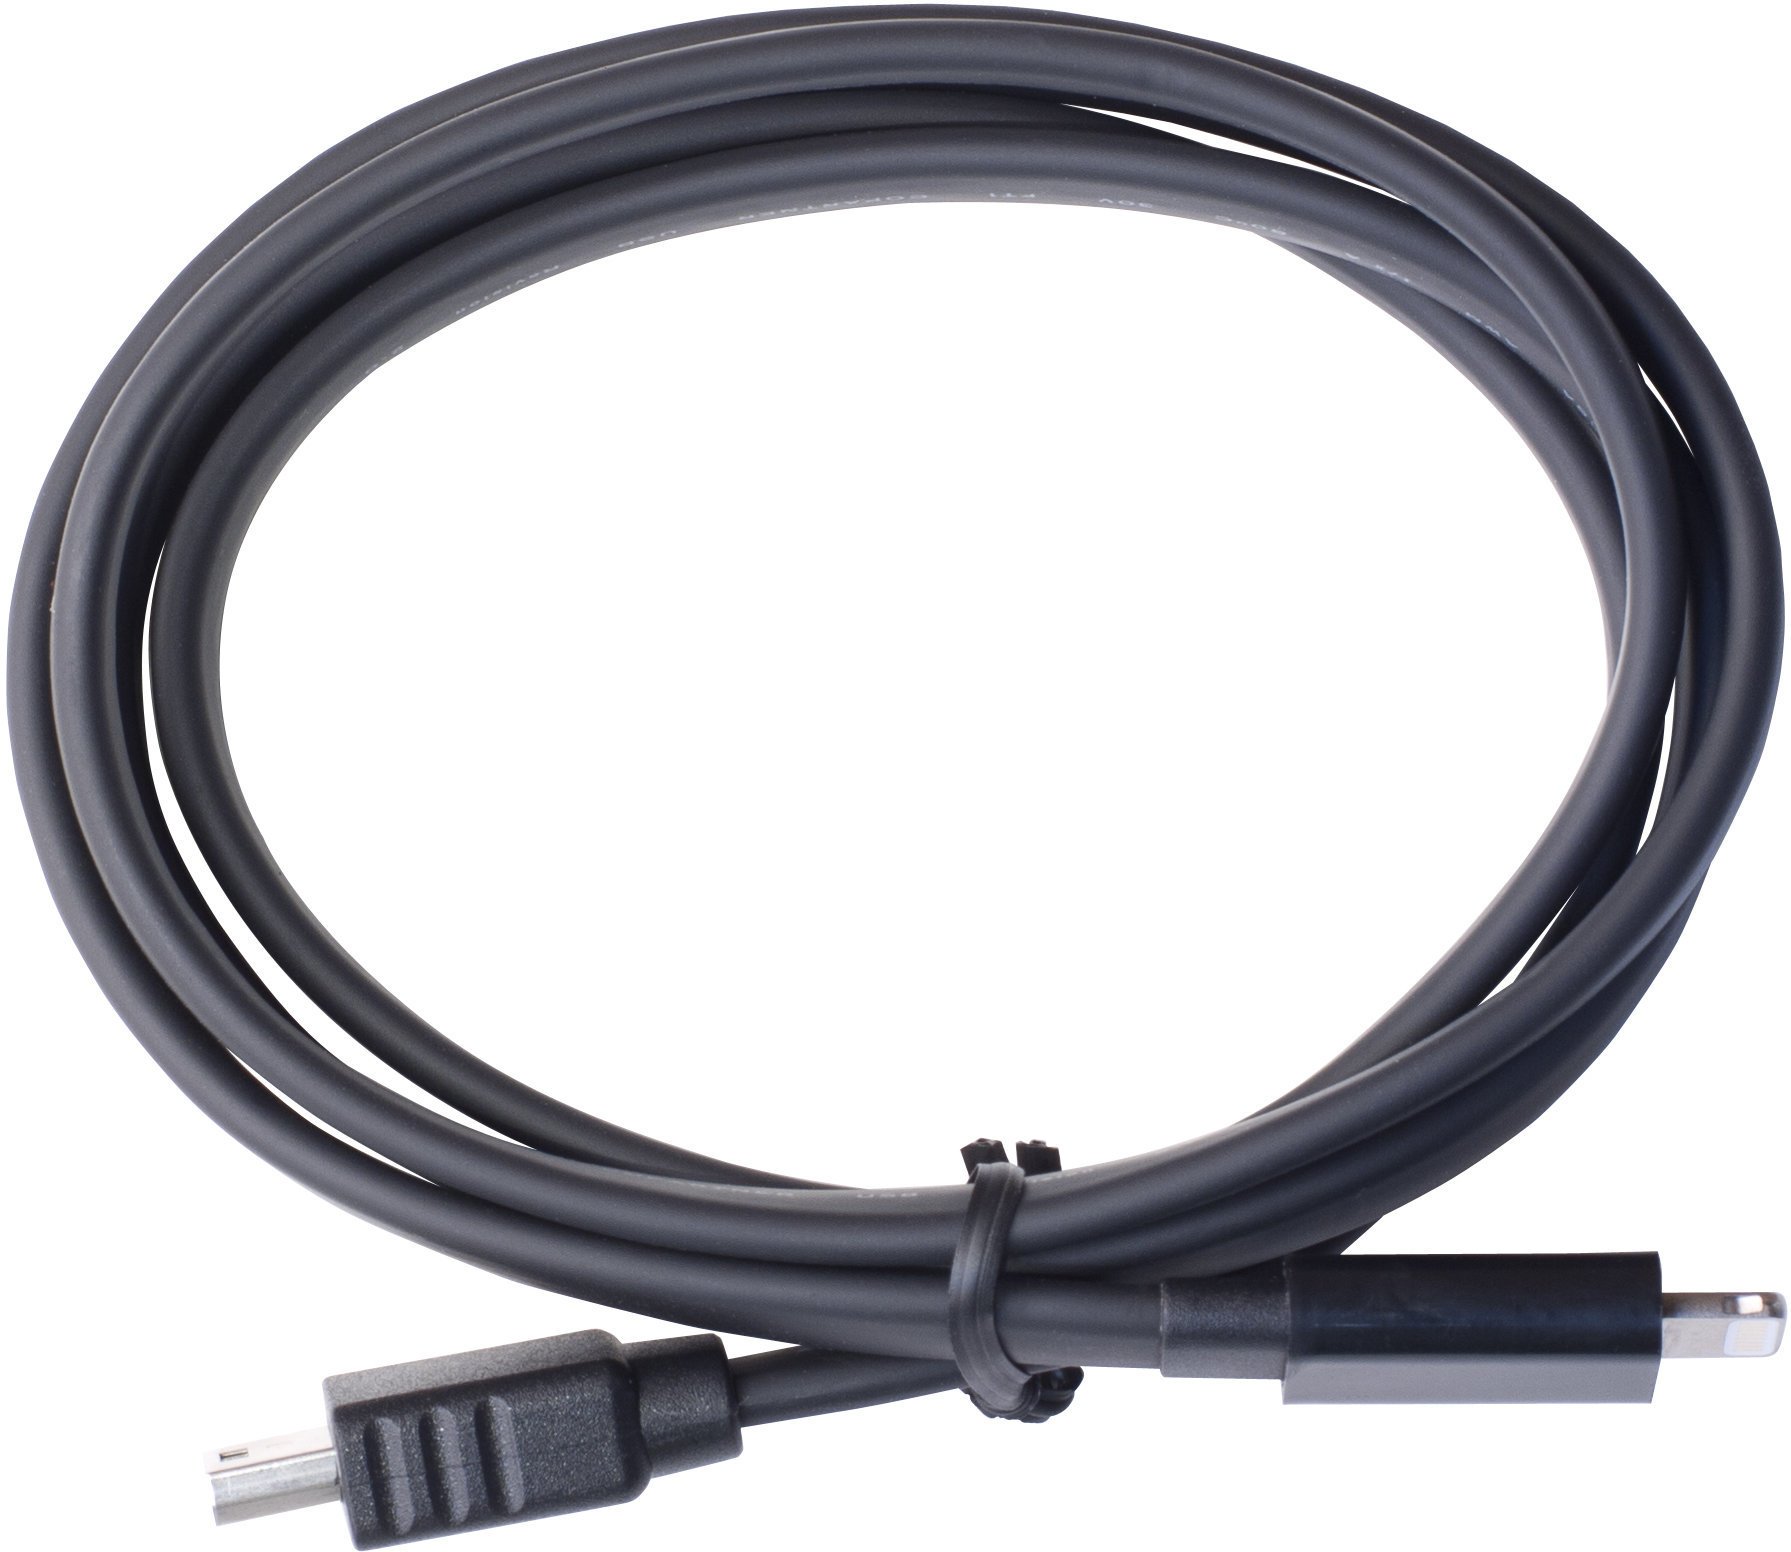 Cabo especial Apogee iPad/iPhone Lgh Cable for Apogee ONE, Duet, and Quartet 100 cm Cabo especial